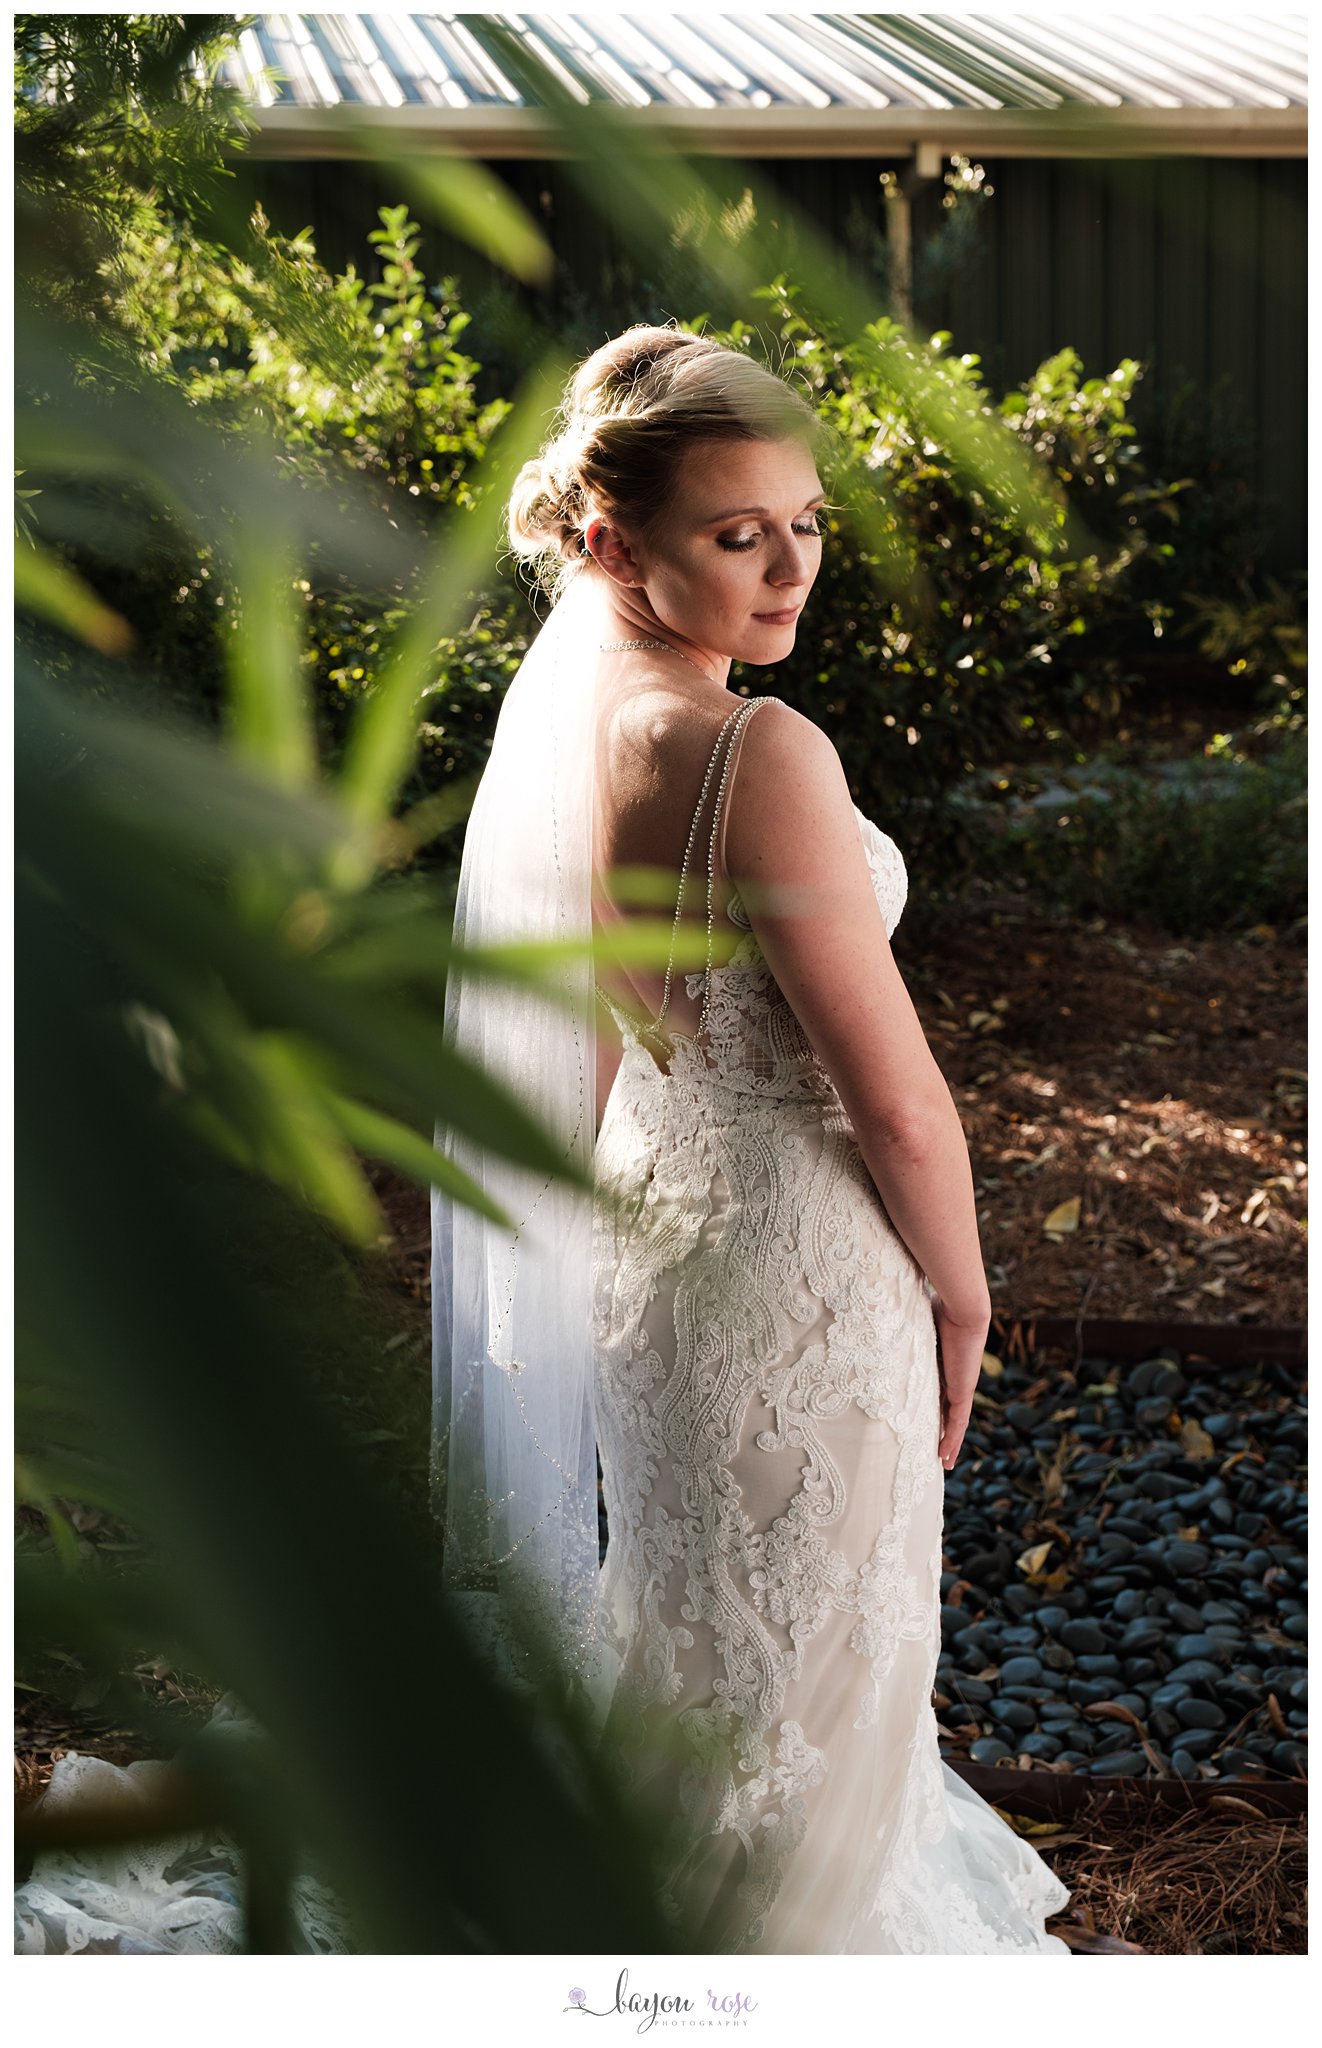 Bride framed by greenery at The Oaks outdoor bridal photo session